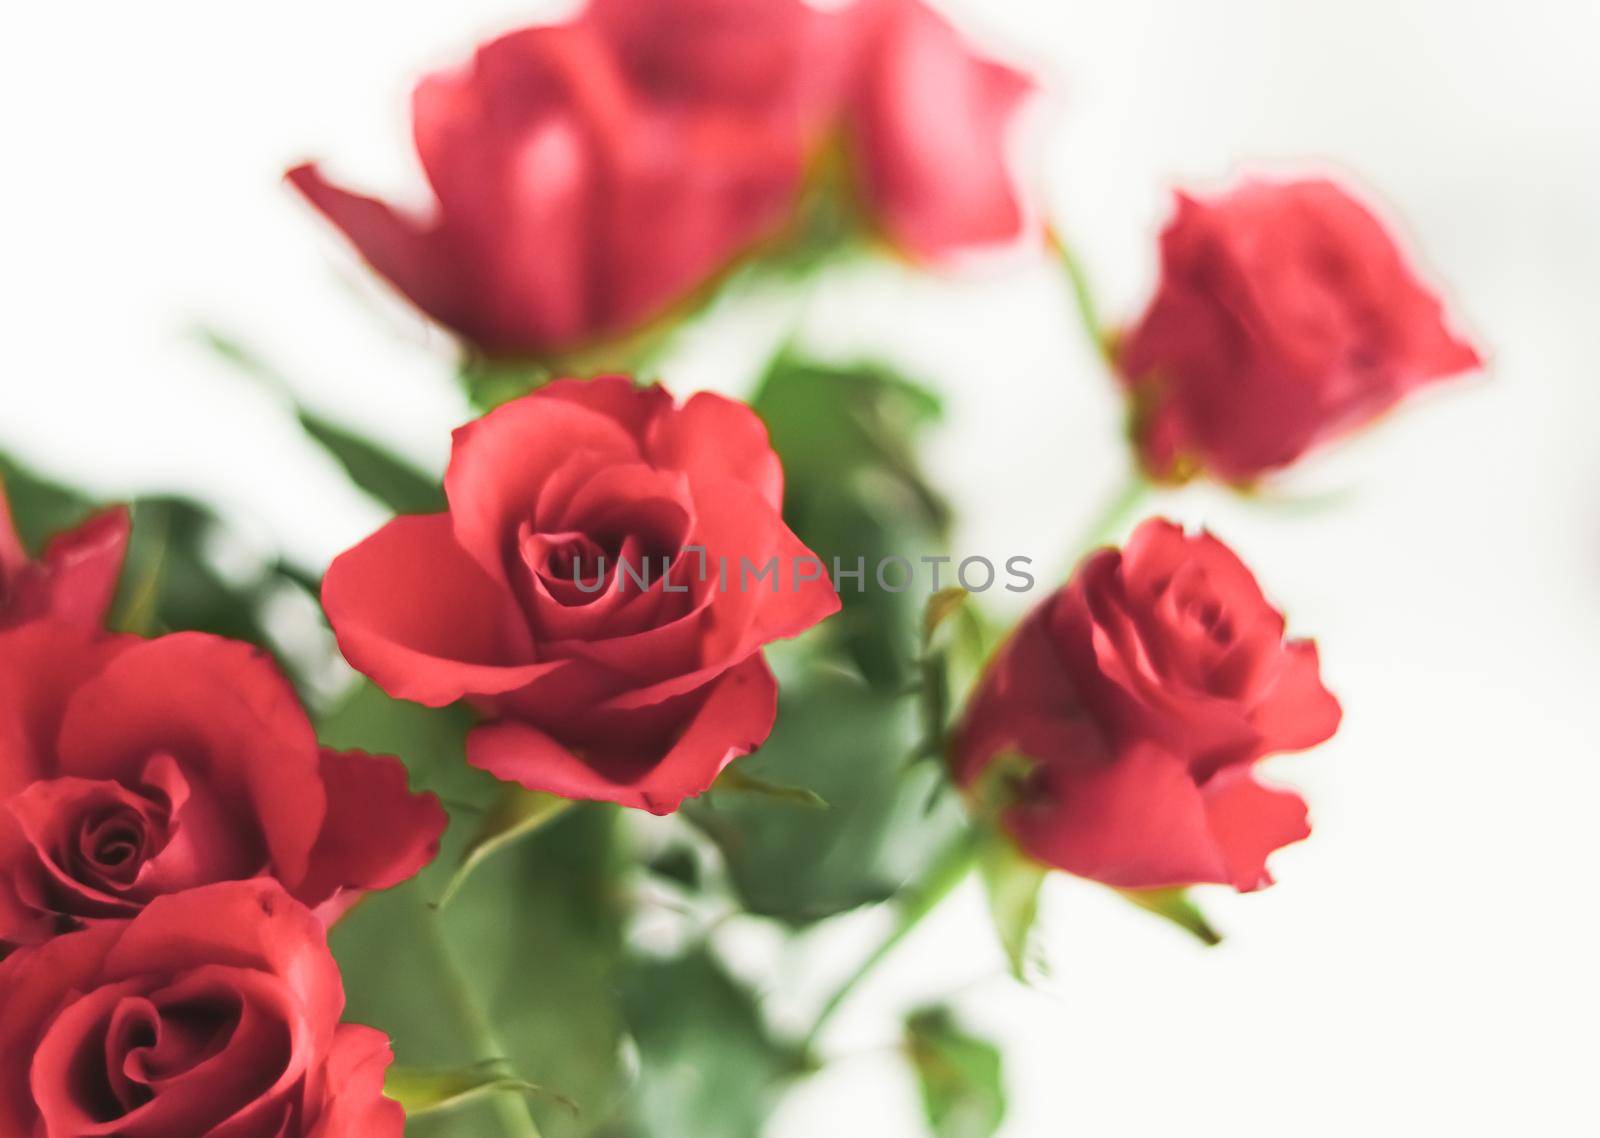 Tender bouquet of roses, floral gift and beautiful flowers closeup